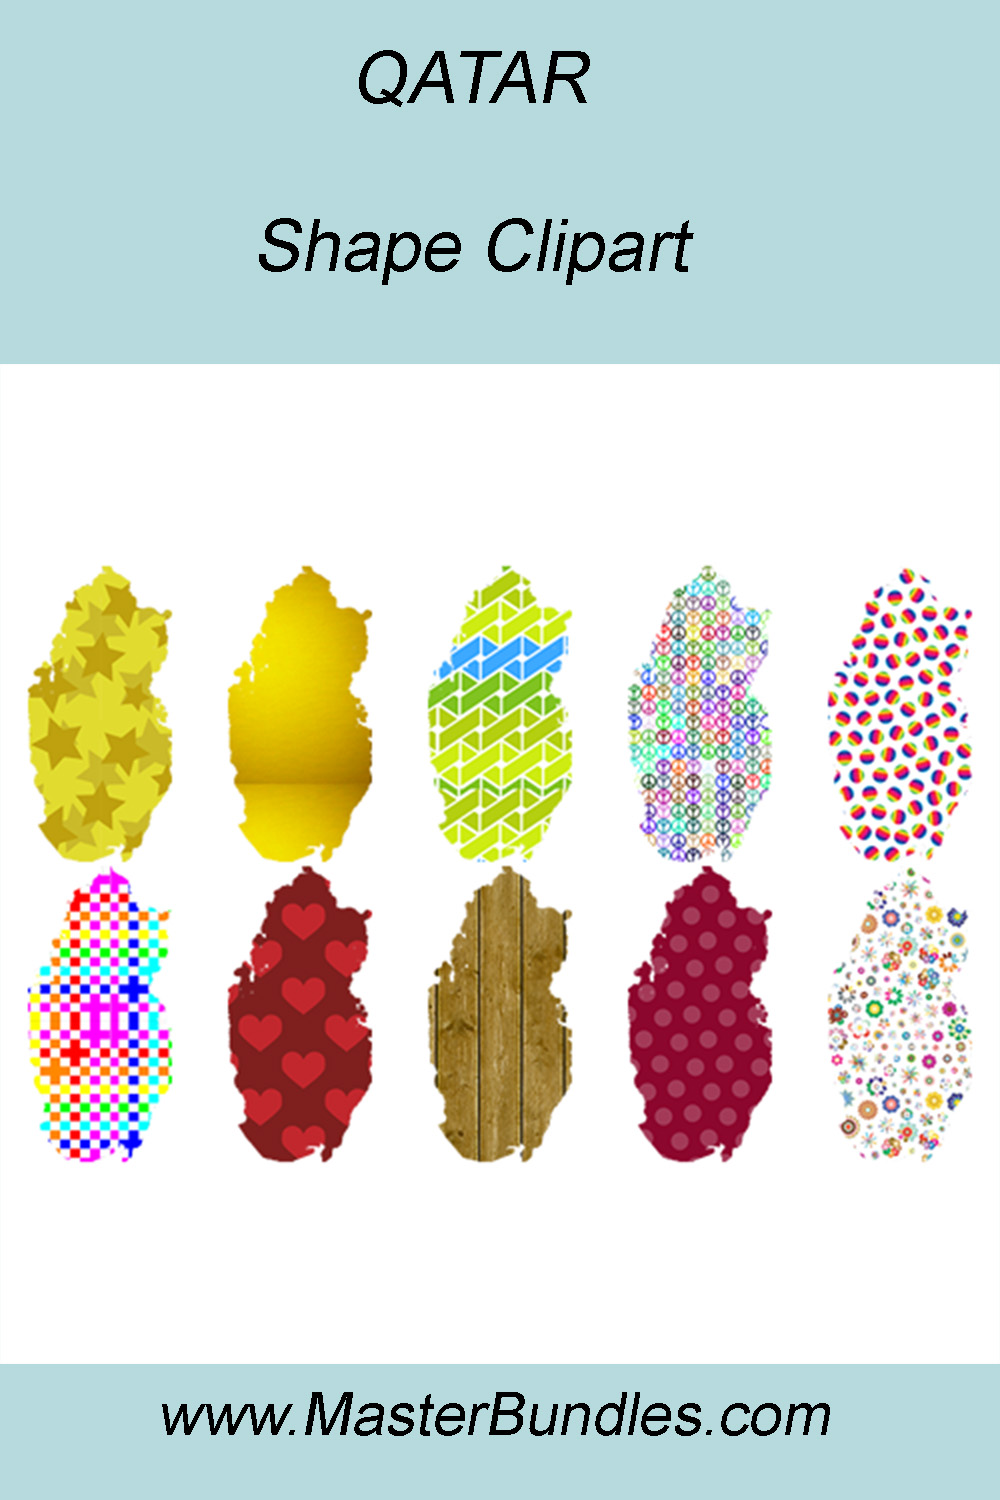 QATAR SHAPE CLIPART ICONS pinterest preview image.